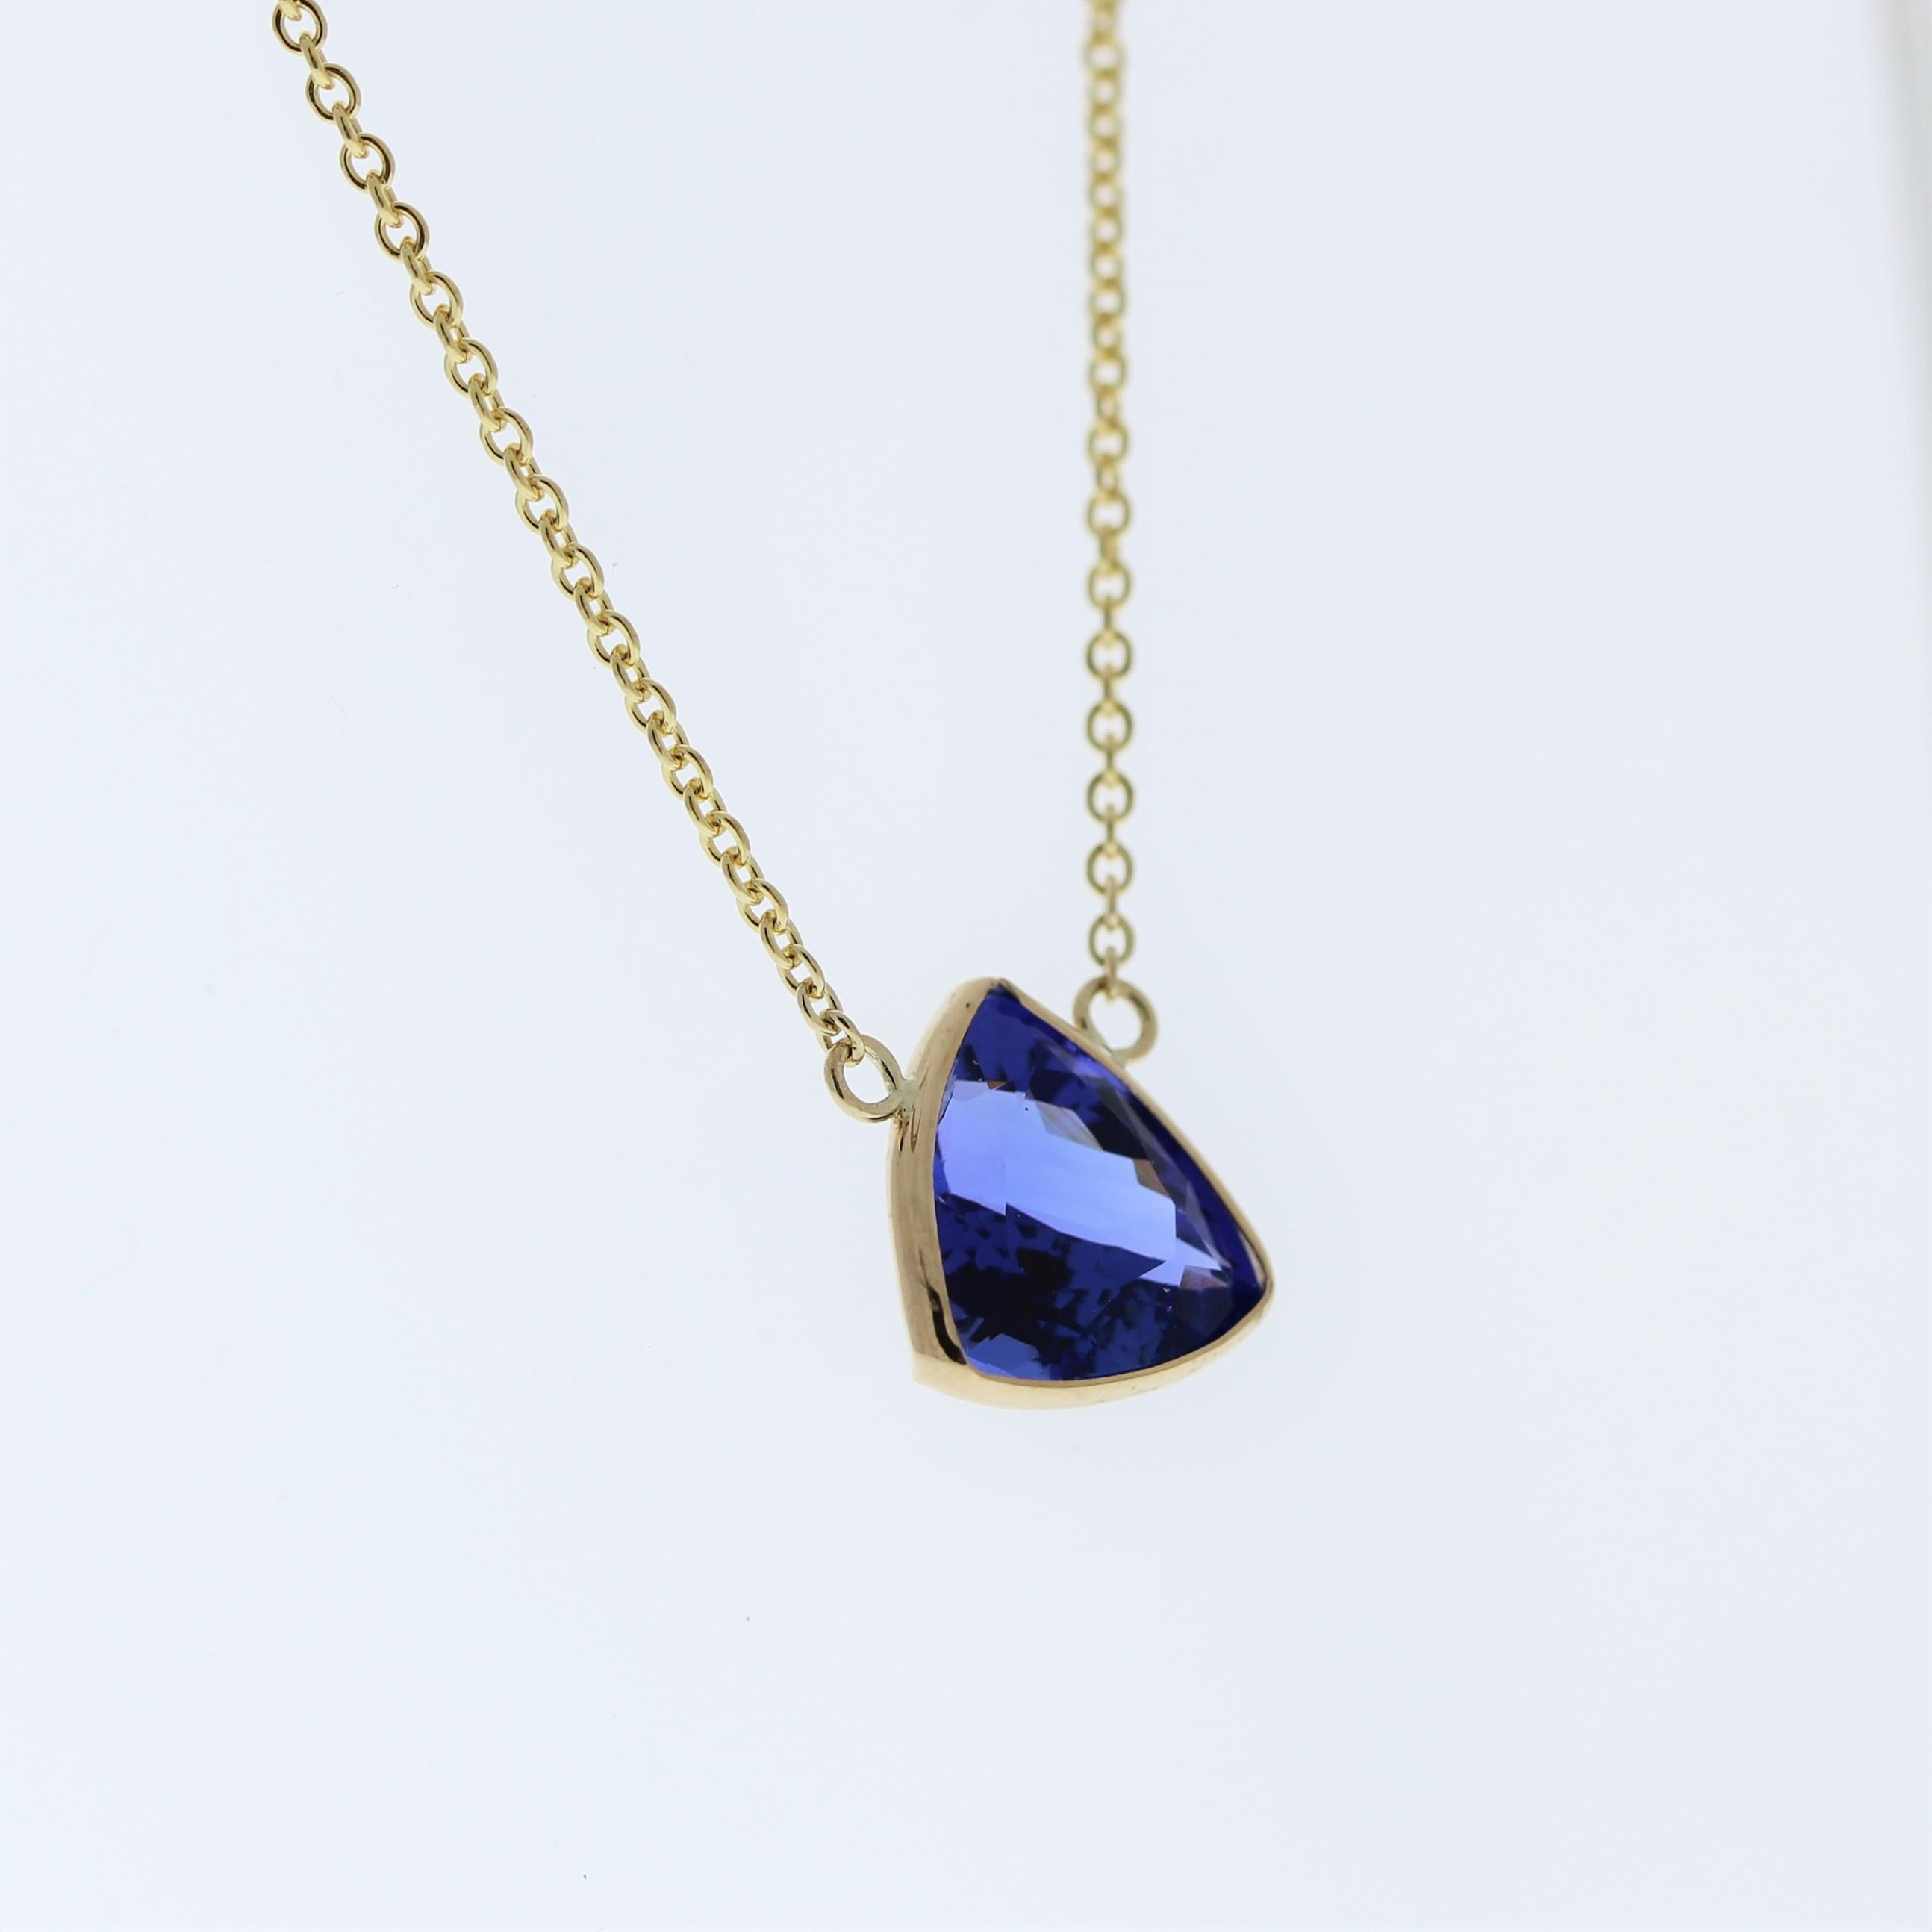 The necklace features a 3.11-carat trilliant-cut tanzanite set in a 14 karat yellow gold pendant or setting. The trilliant cut and the captivating blue-violet color of the tanzanite against the yellow gold setting are likely to create an elegant and